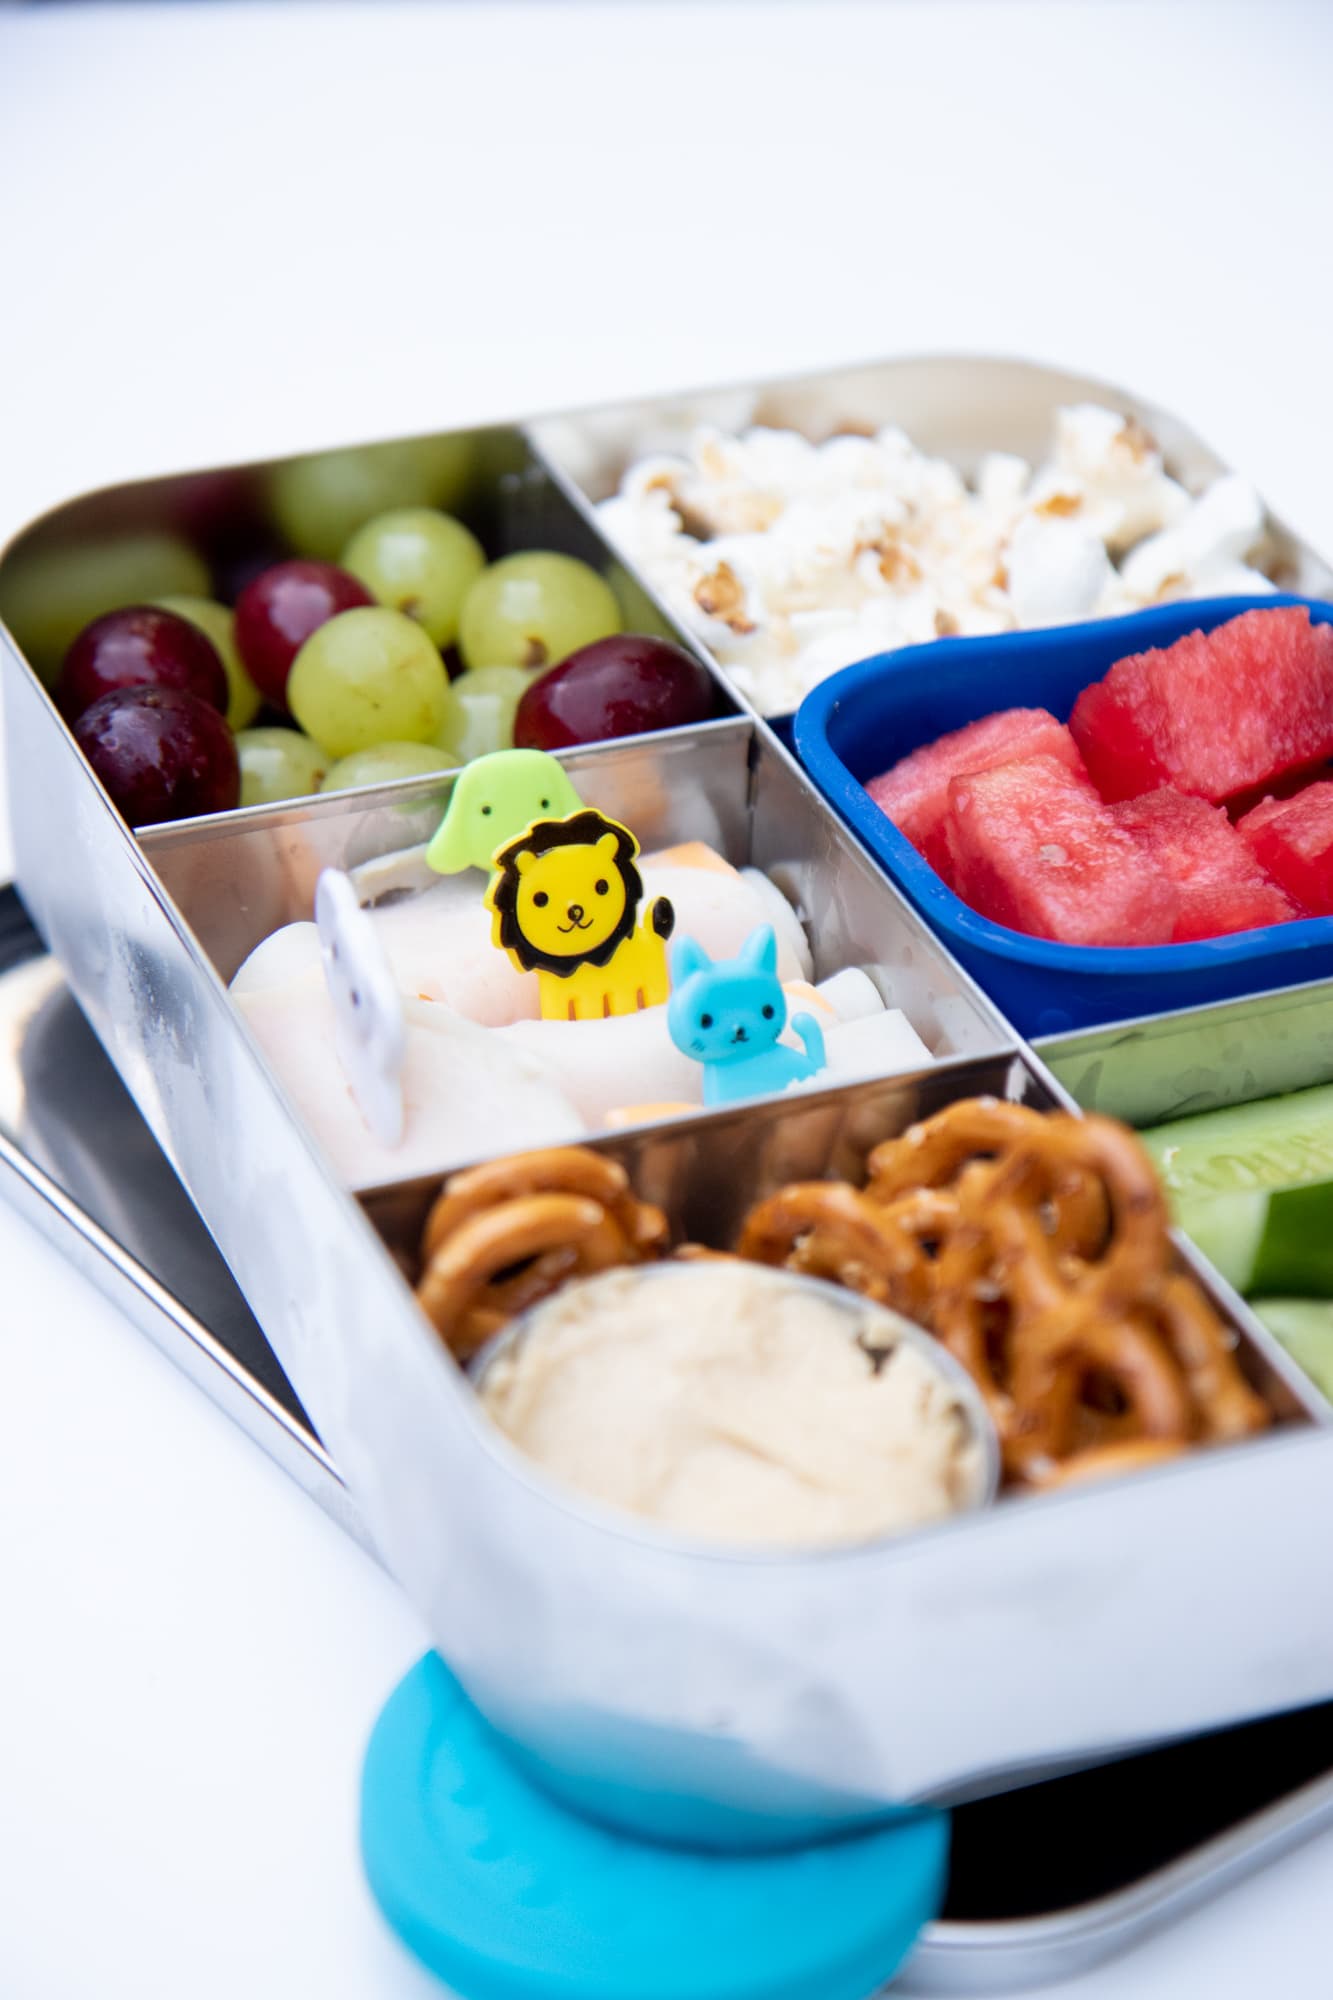 Stainless steel bento-style lunchbox filled with a snack lunch: pretzels and dip, grapes, watermelon, popcorn, cucumber spears, and deli meat roll-ups